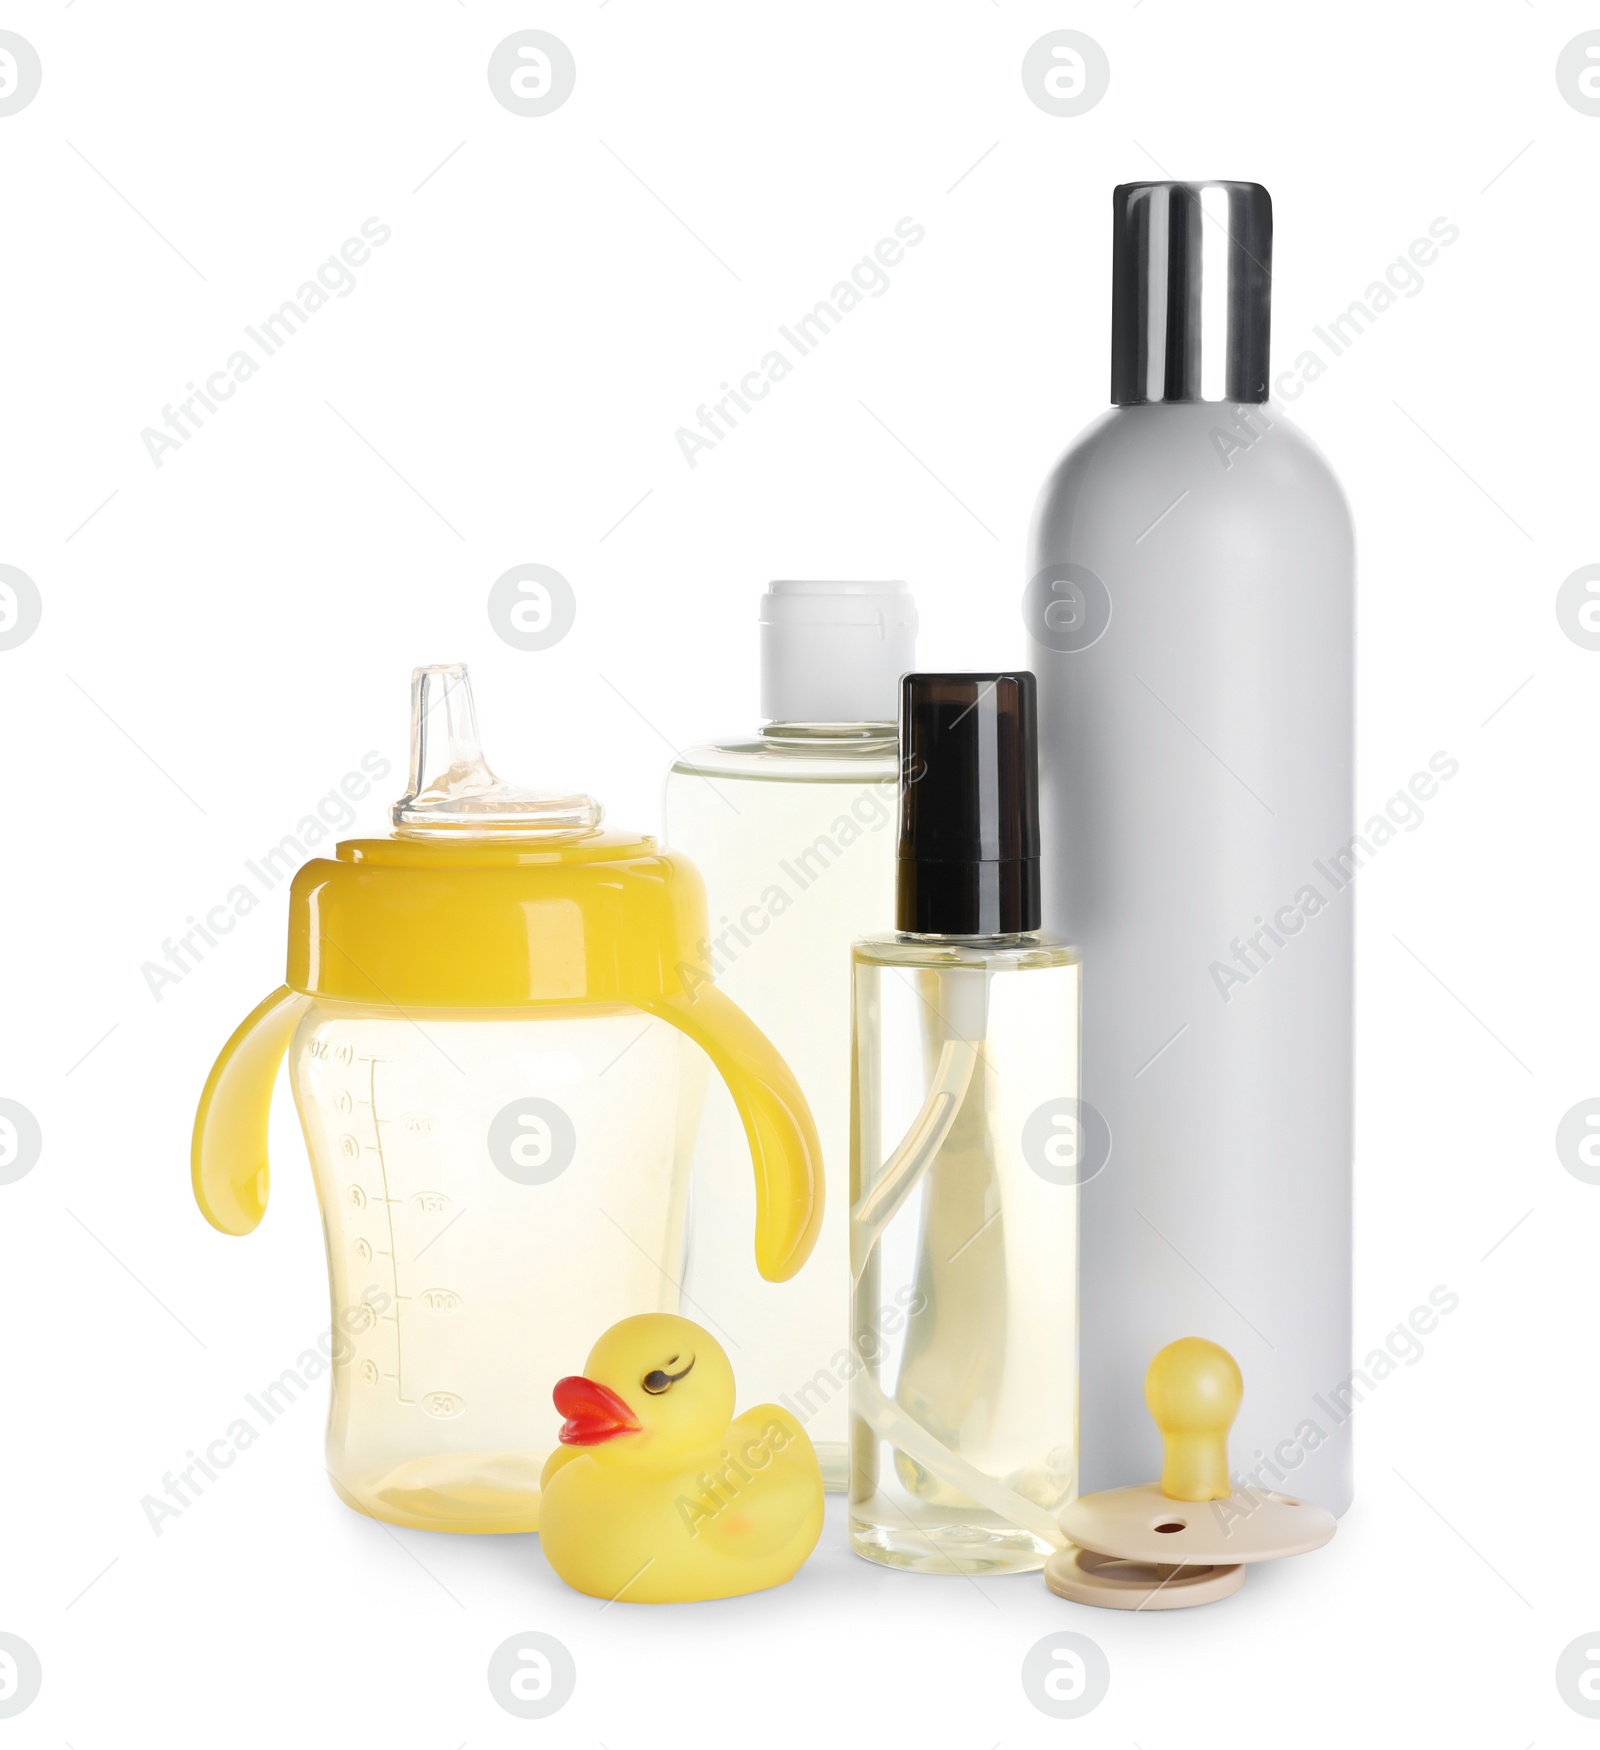 Photo of Bottles of baby oil, other cosmetic products and accessories on white background